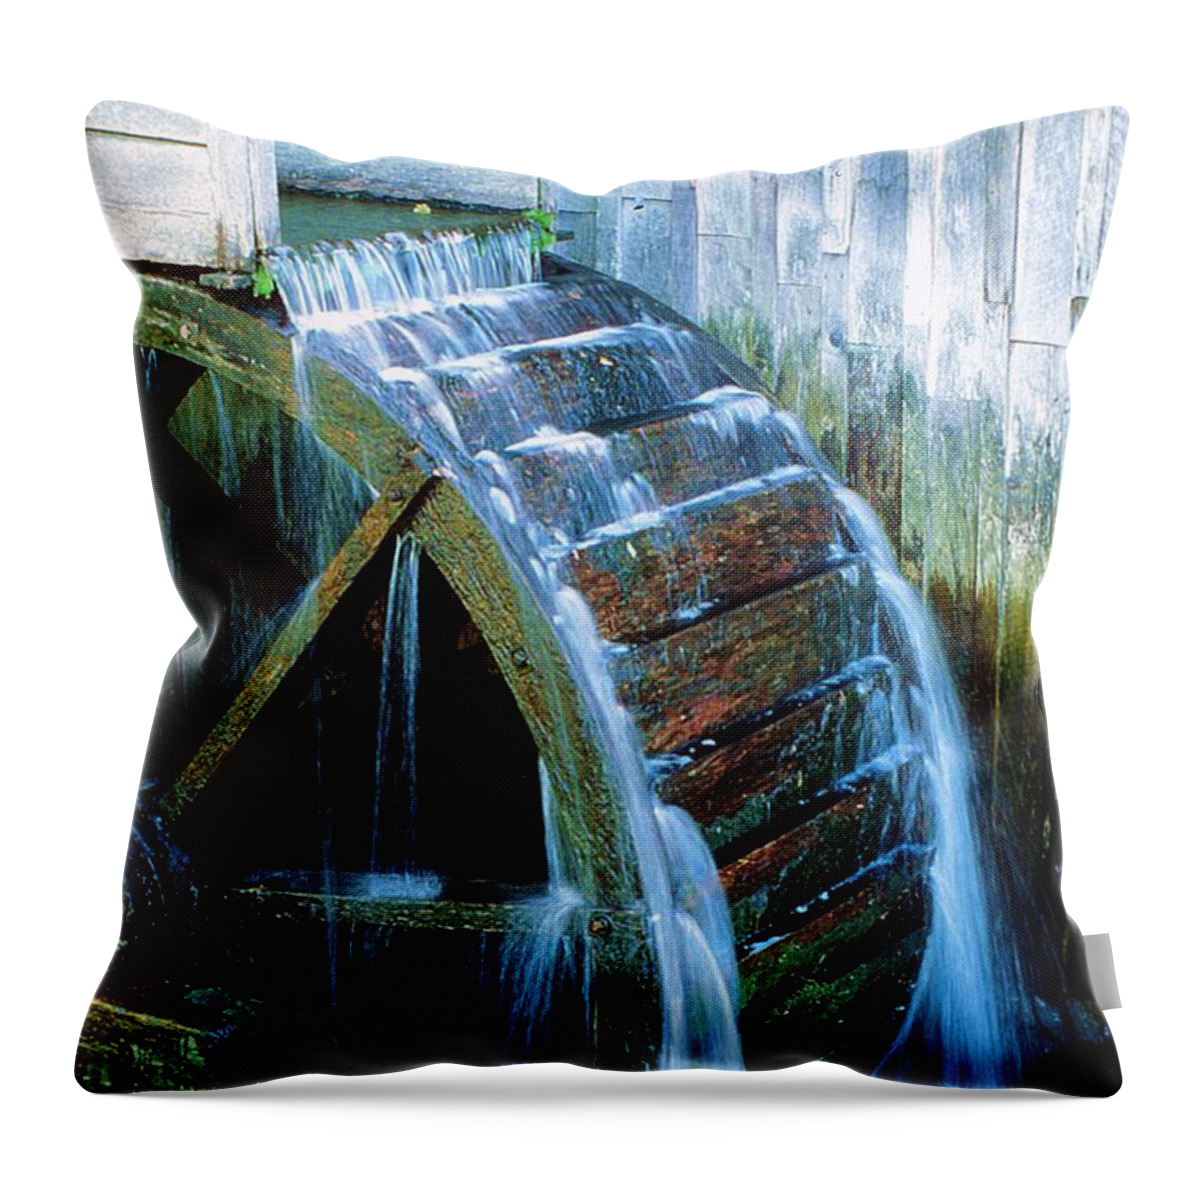 Fine Art Throw Pillow featuring the photograph Water Wheel by Rodney Lee Williams